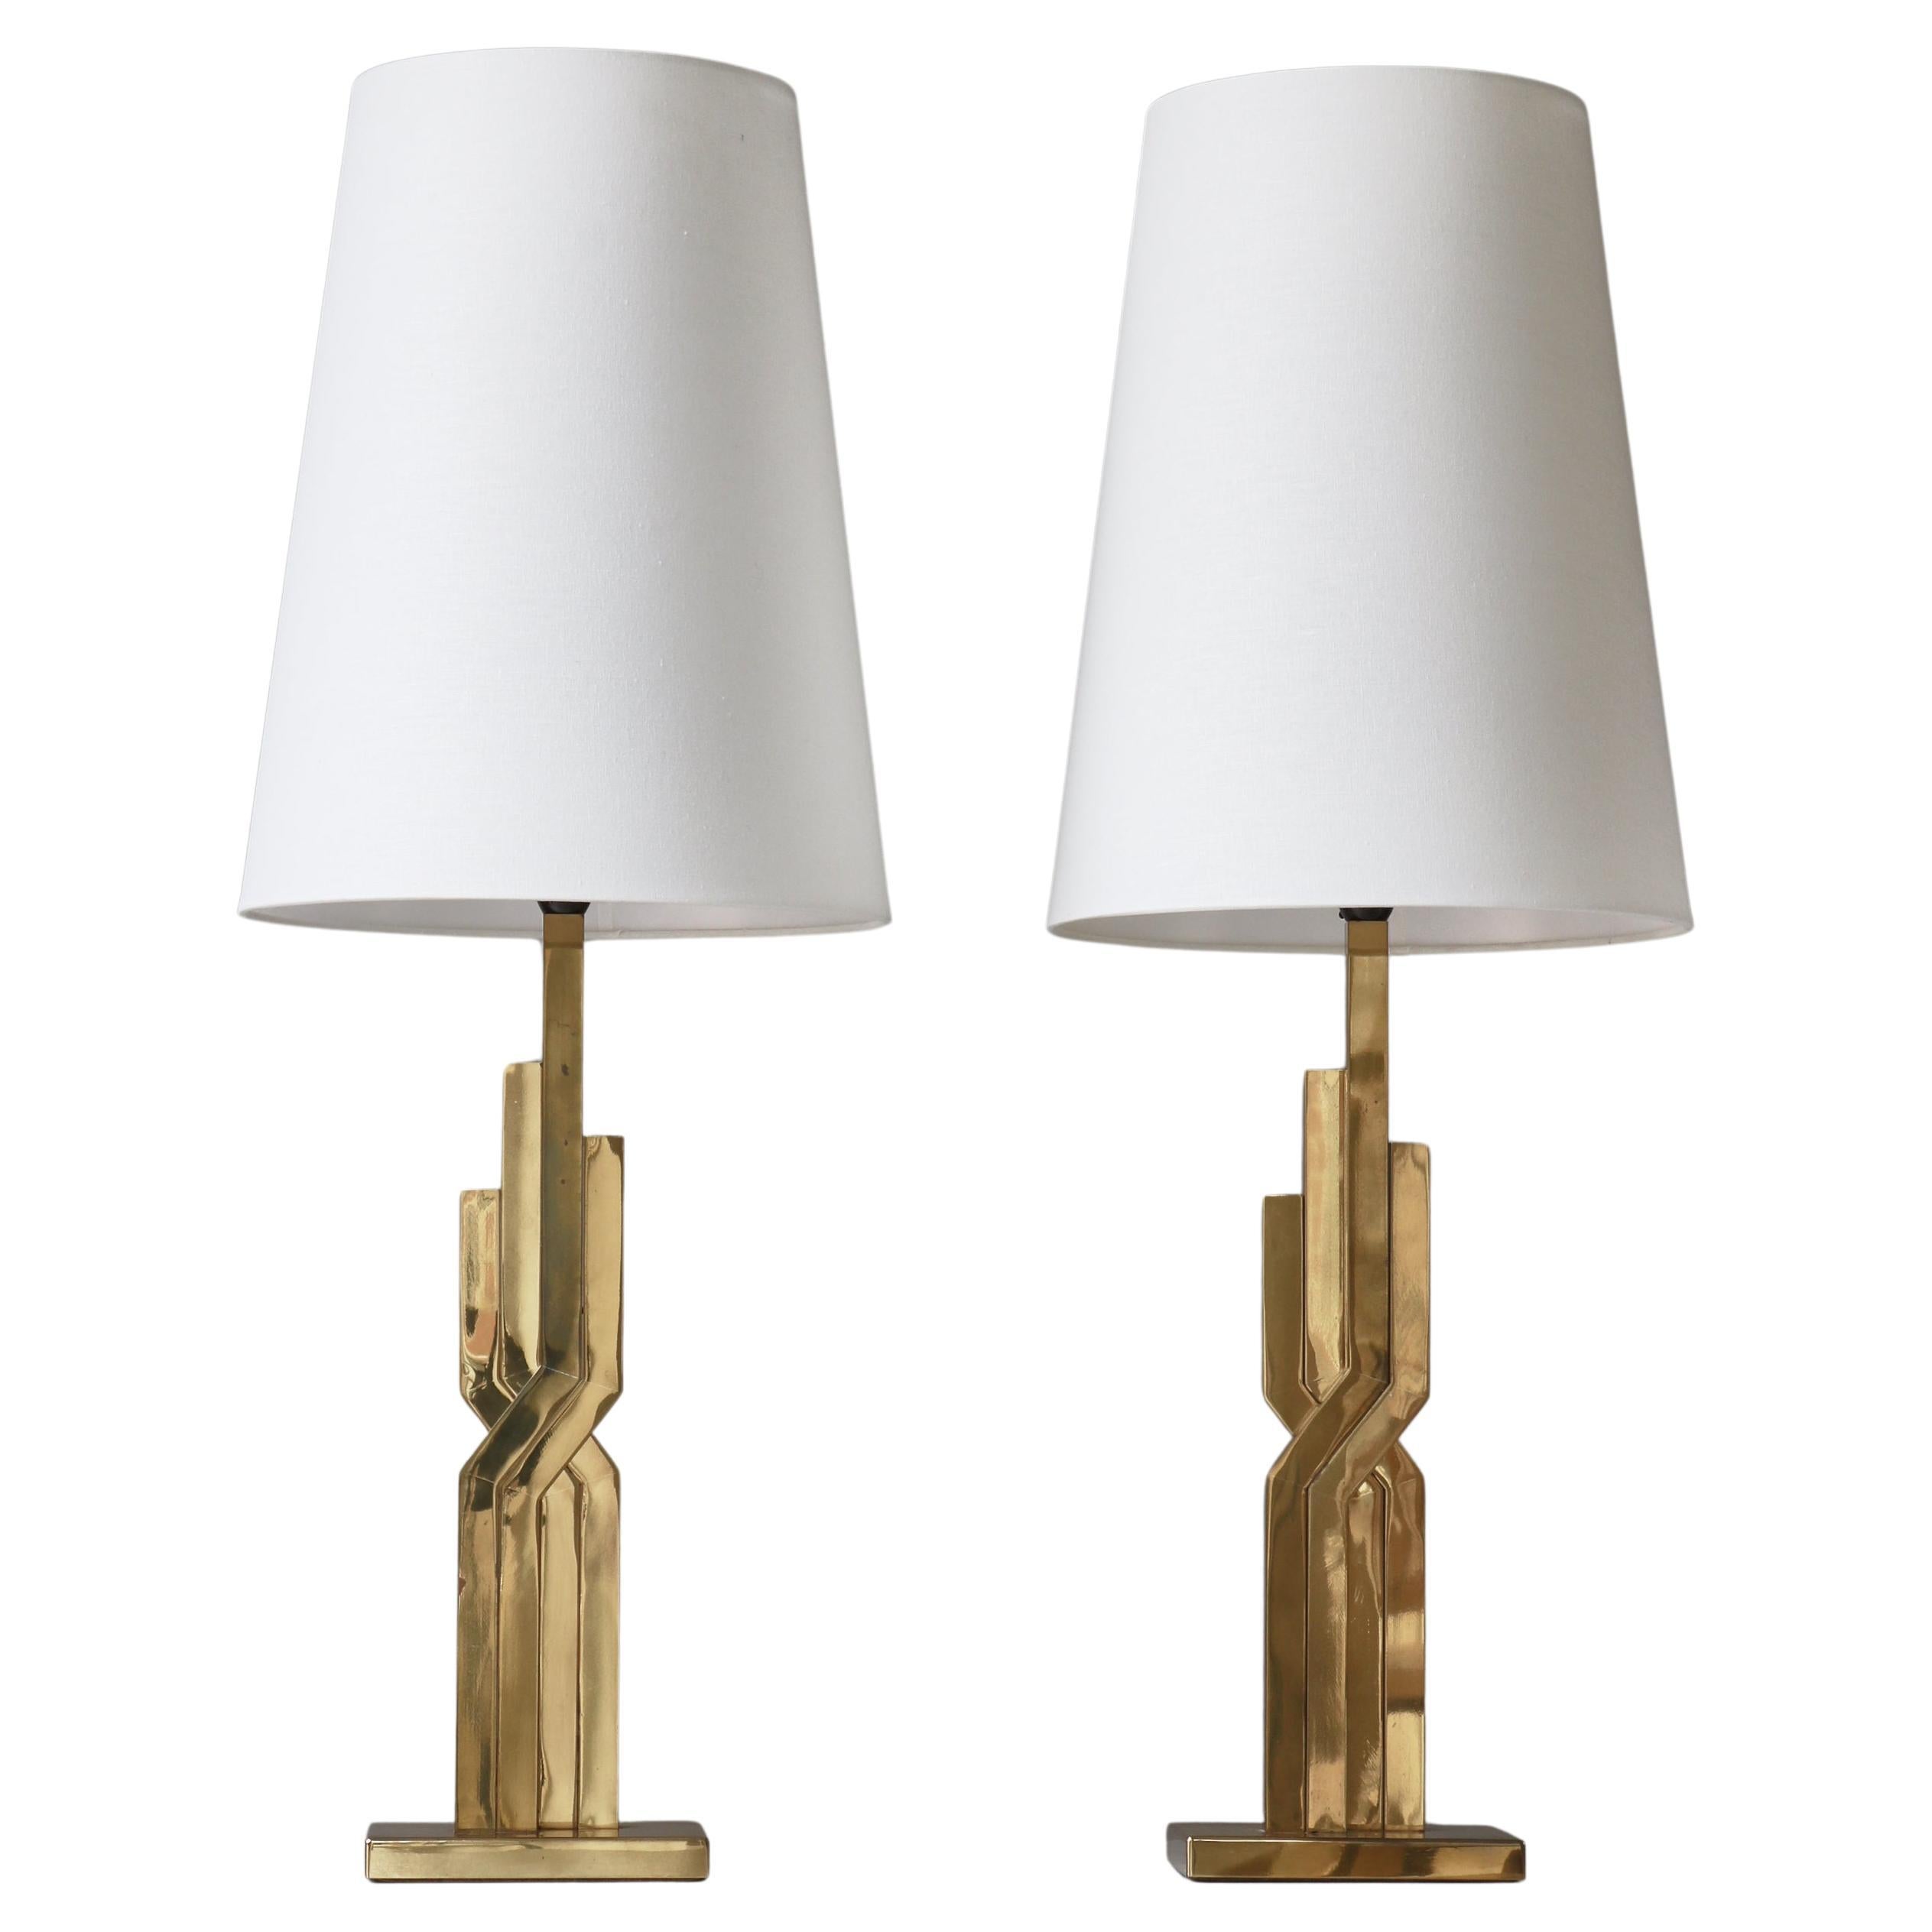 Large Danish Modern Table Lamps in Brass by Svend Aage Holm-Sørensen, 1960s For Sale